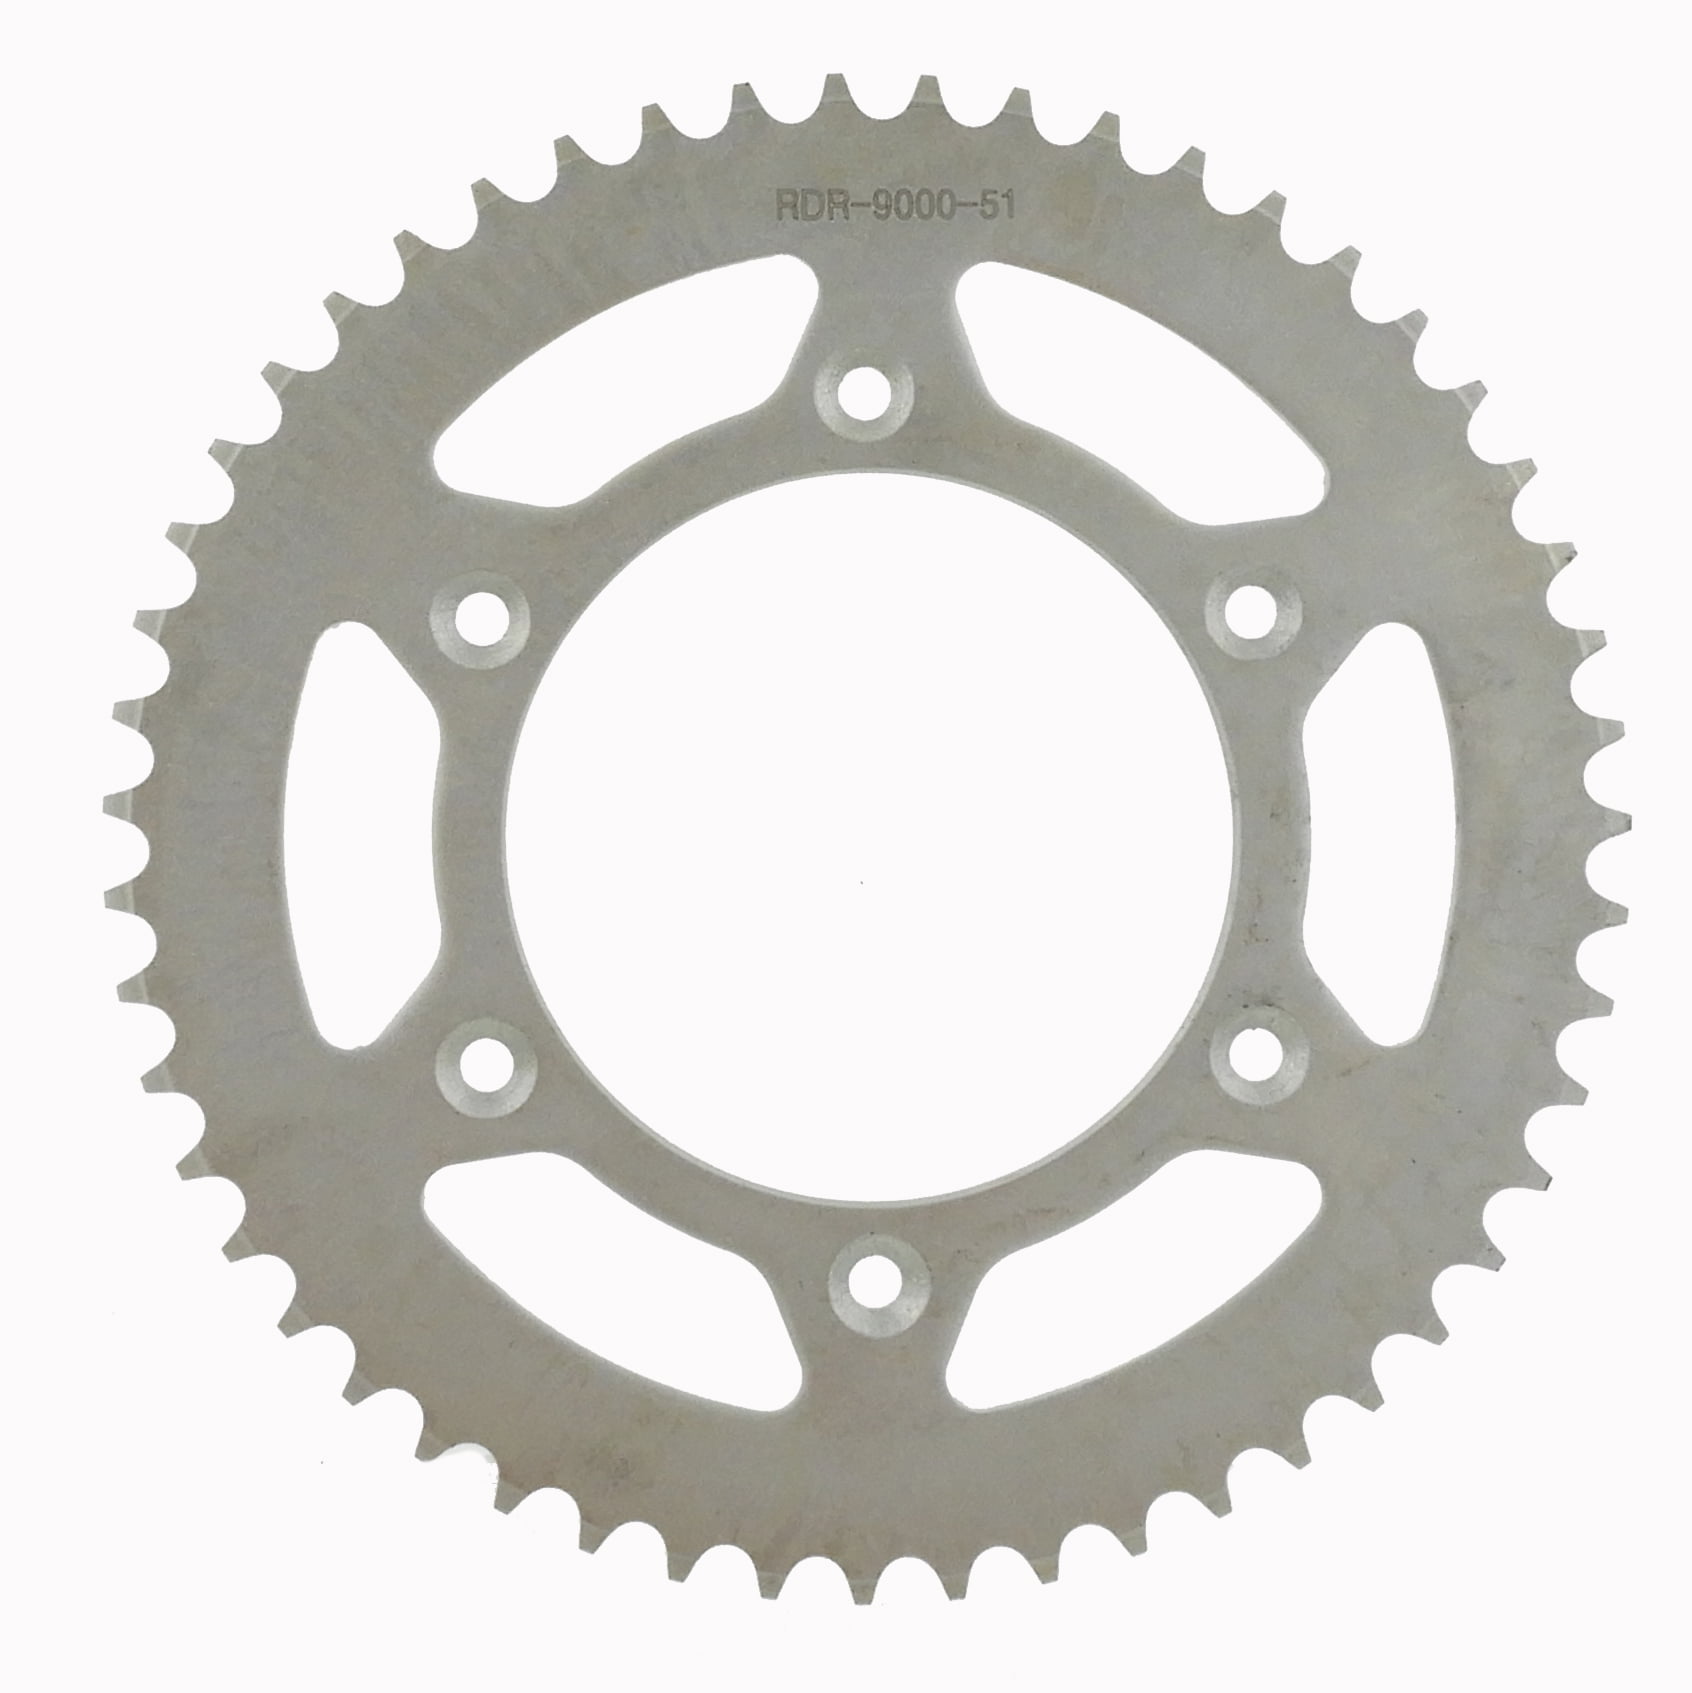 Race Driven Honda 13 Tooth Front Sprocket CRF150 CRF230 Race-Driven